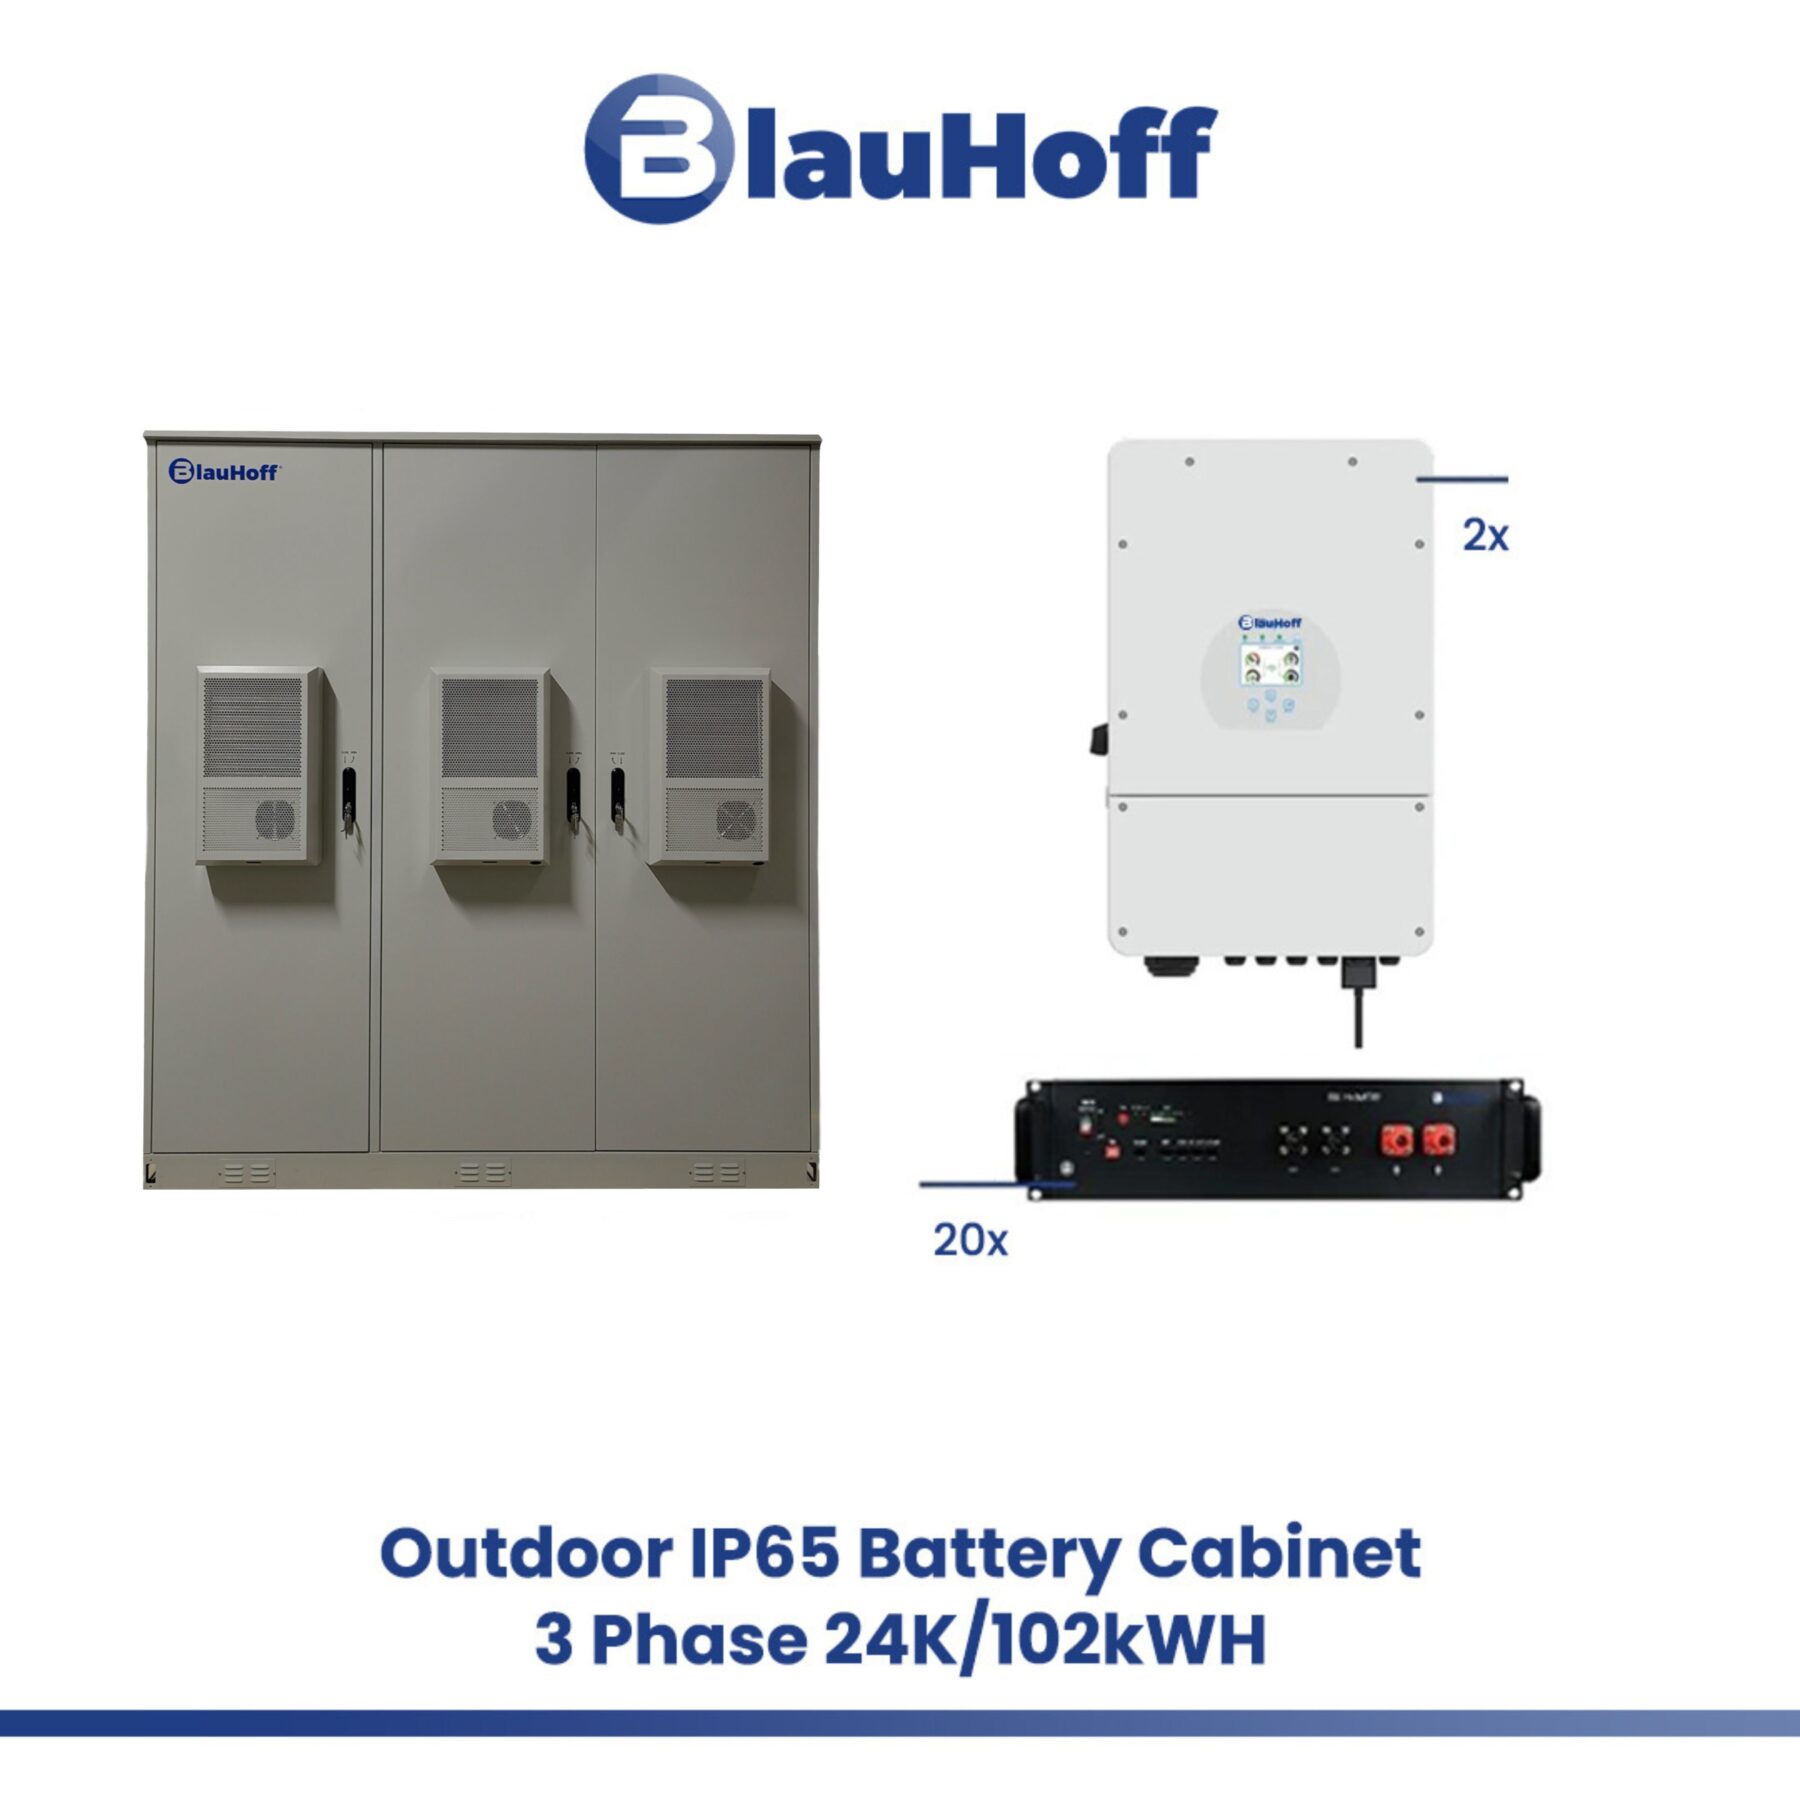 https://blauhoff.nl/wp-content/uploads/2023/05/Outdoor-IP65-Battery-Cabinet-3-Phase-4-scaled.jpeg